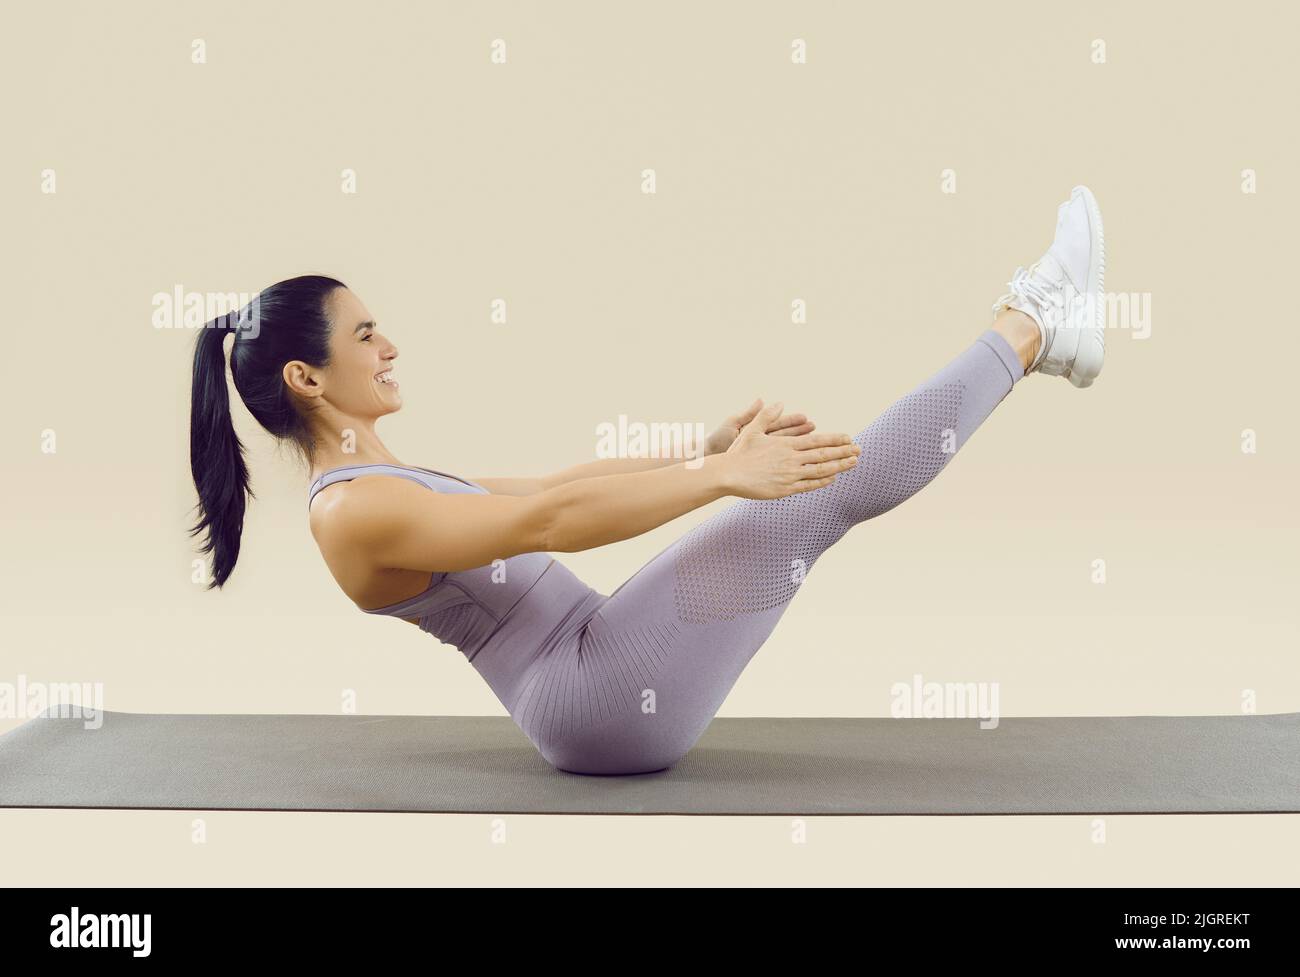 Smiling sporty woman in sportswear doing abs exercise with leg raise on beige background. Stock Photo